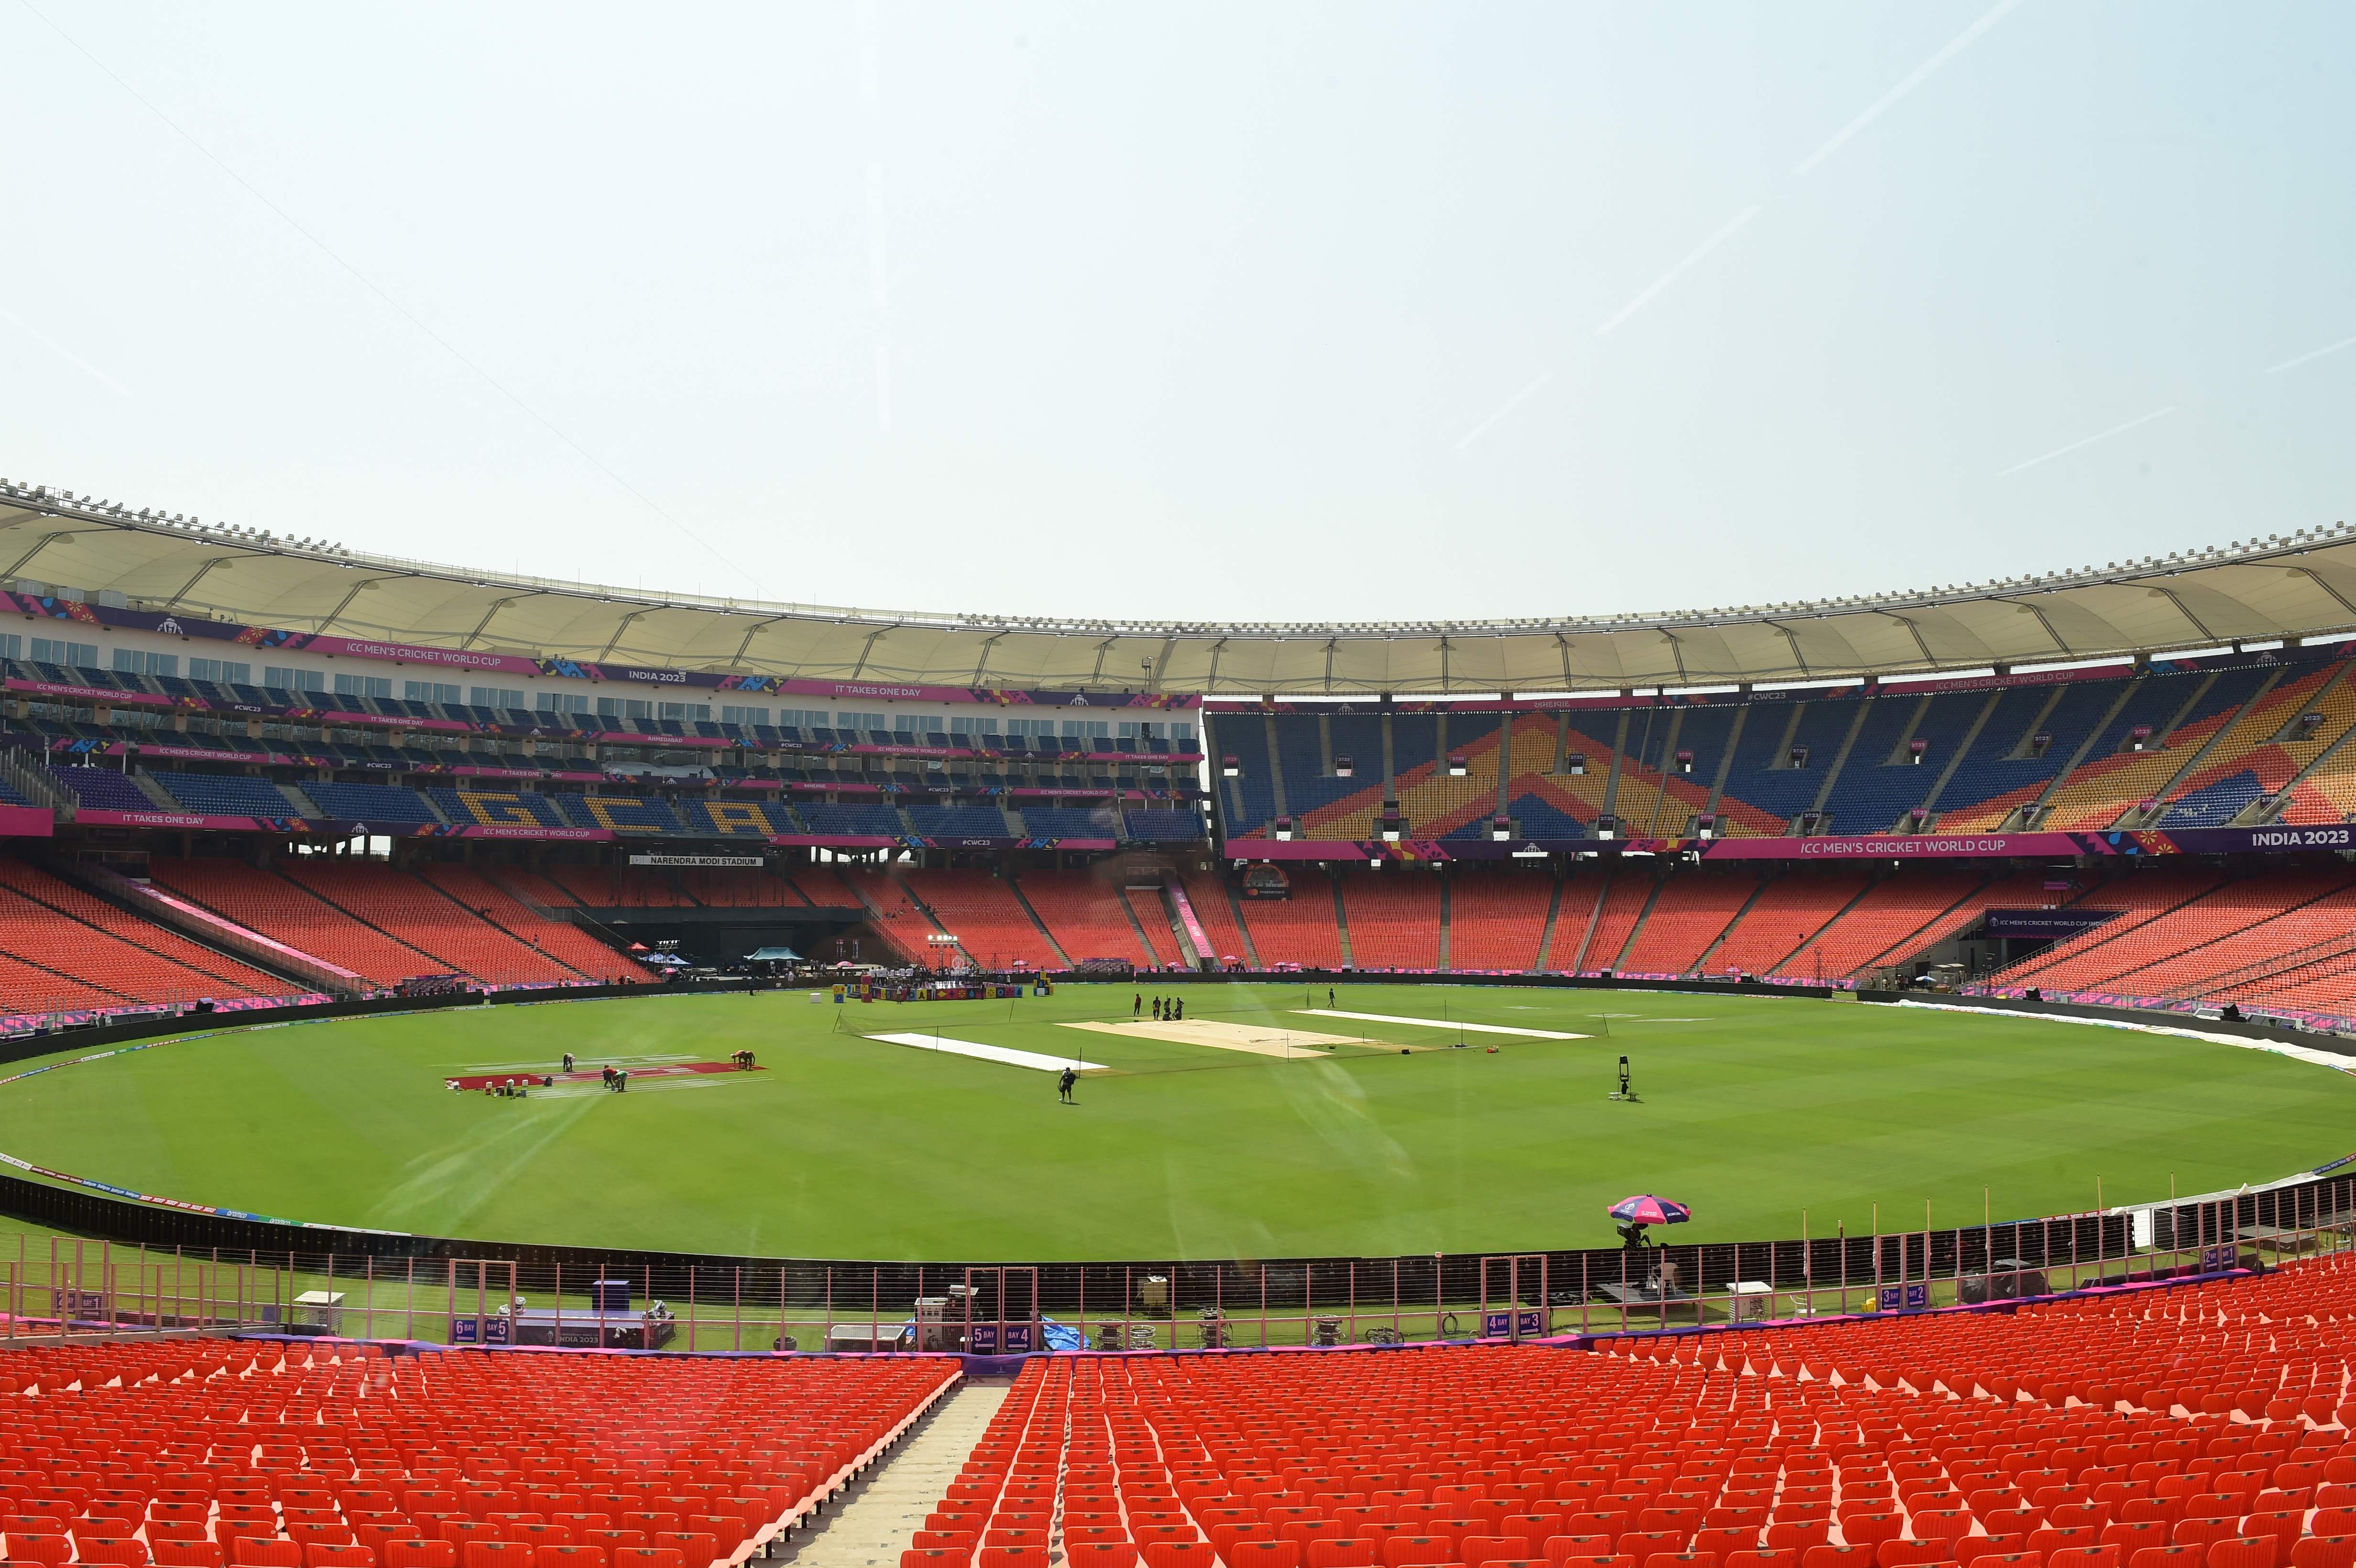 The Narendra Modi Stadium in Ahmedabad on 13 October 2023, the eve of the 2023 ICC Men's Cricket World Cup one-day international (ODI) match between India and Pakistan